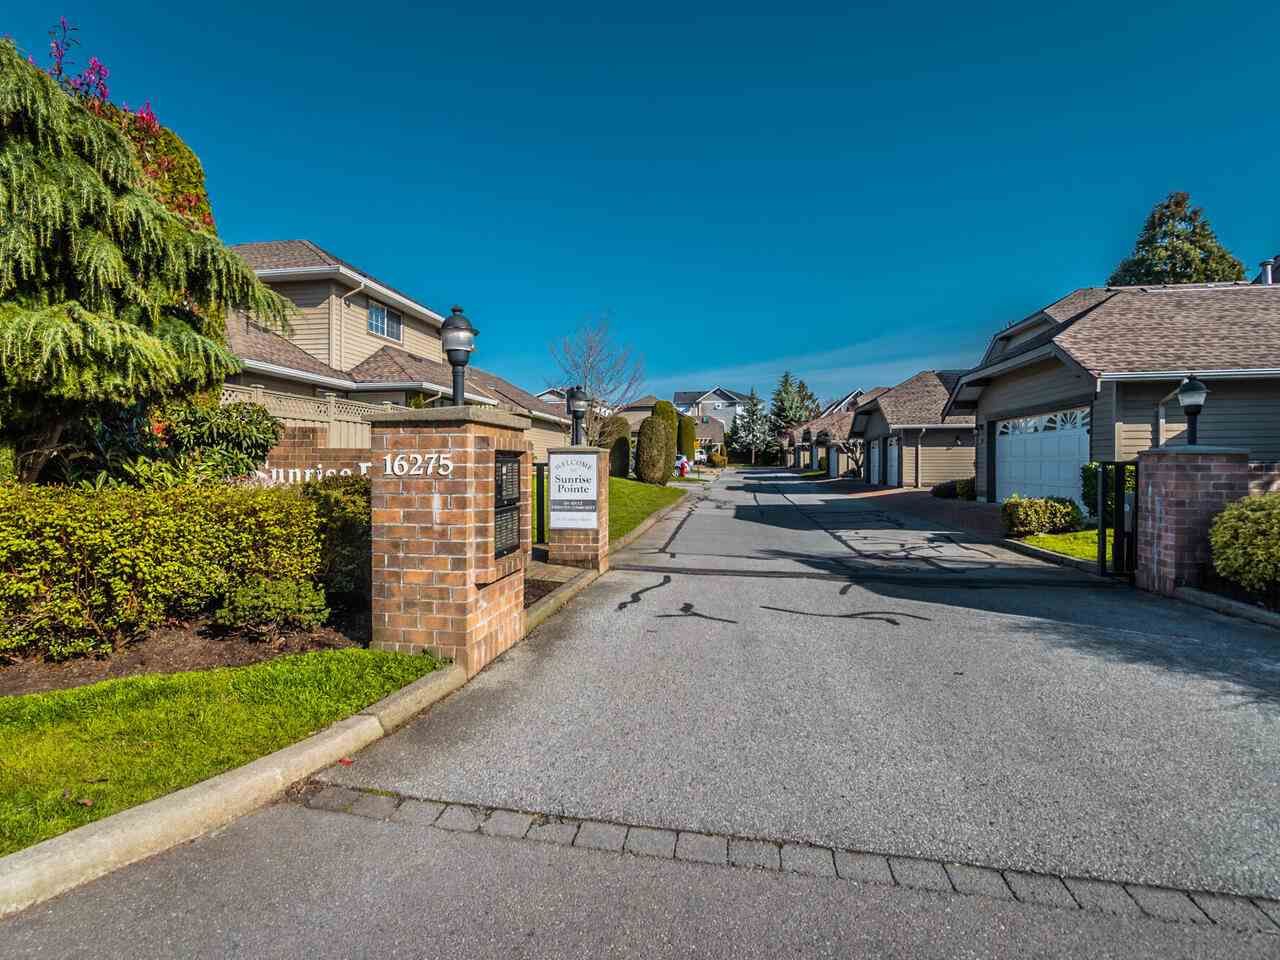 I have sold a property at 163 16275 15 AVE in Surrey
